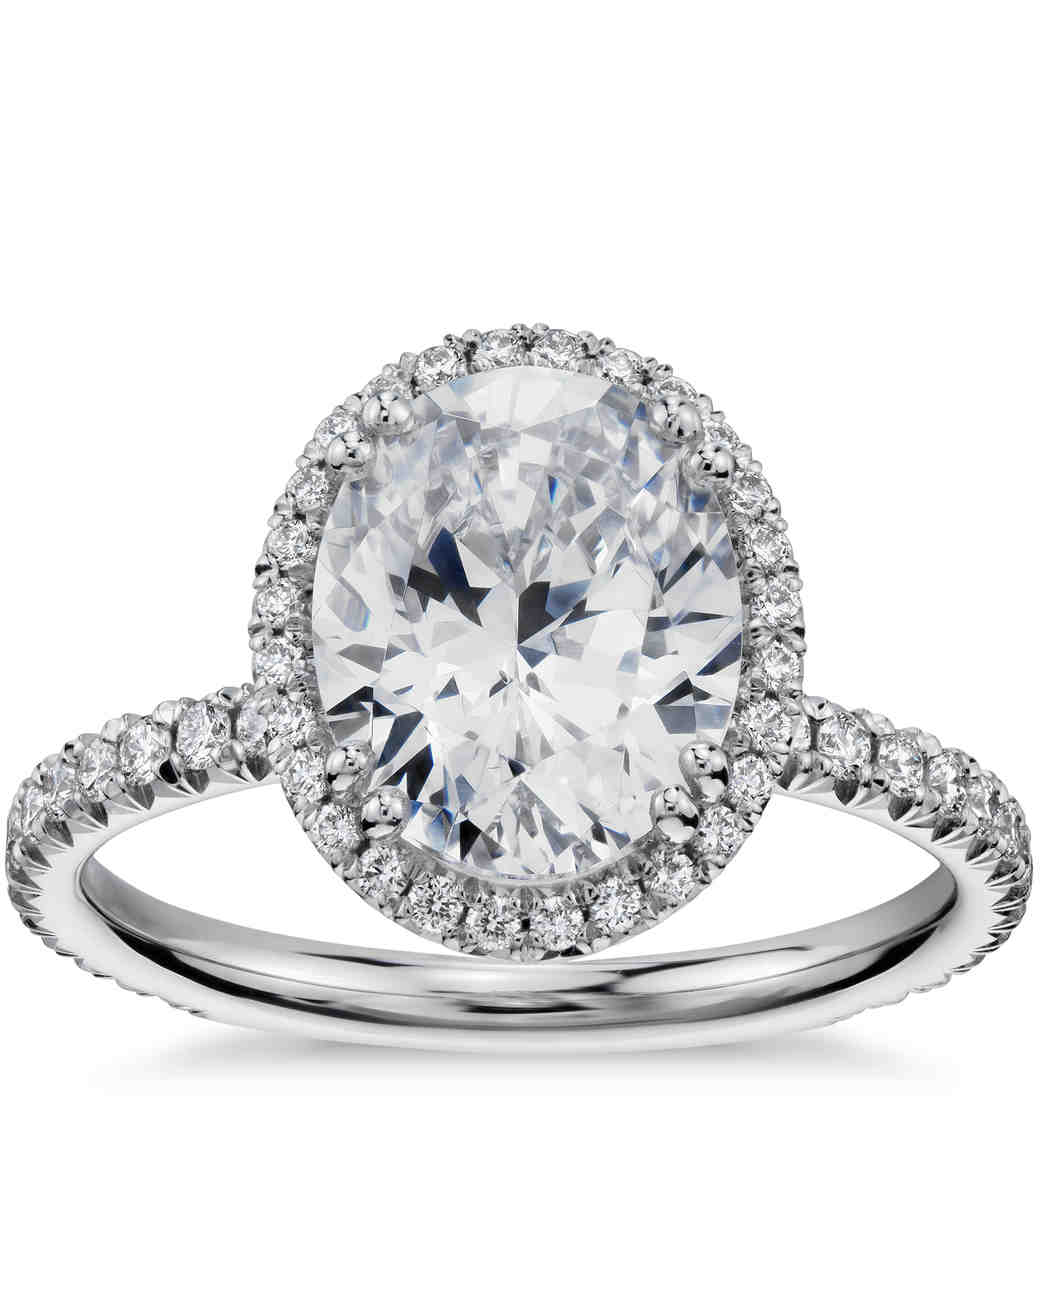 Oval Engagement Rings for the Bride-to-Be | Martha Stewart Weddings